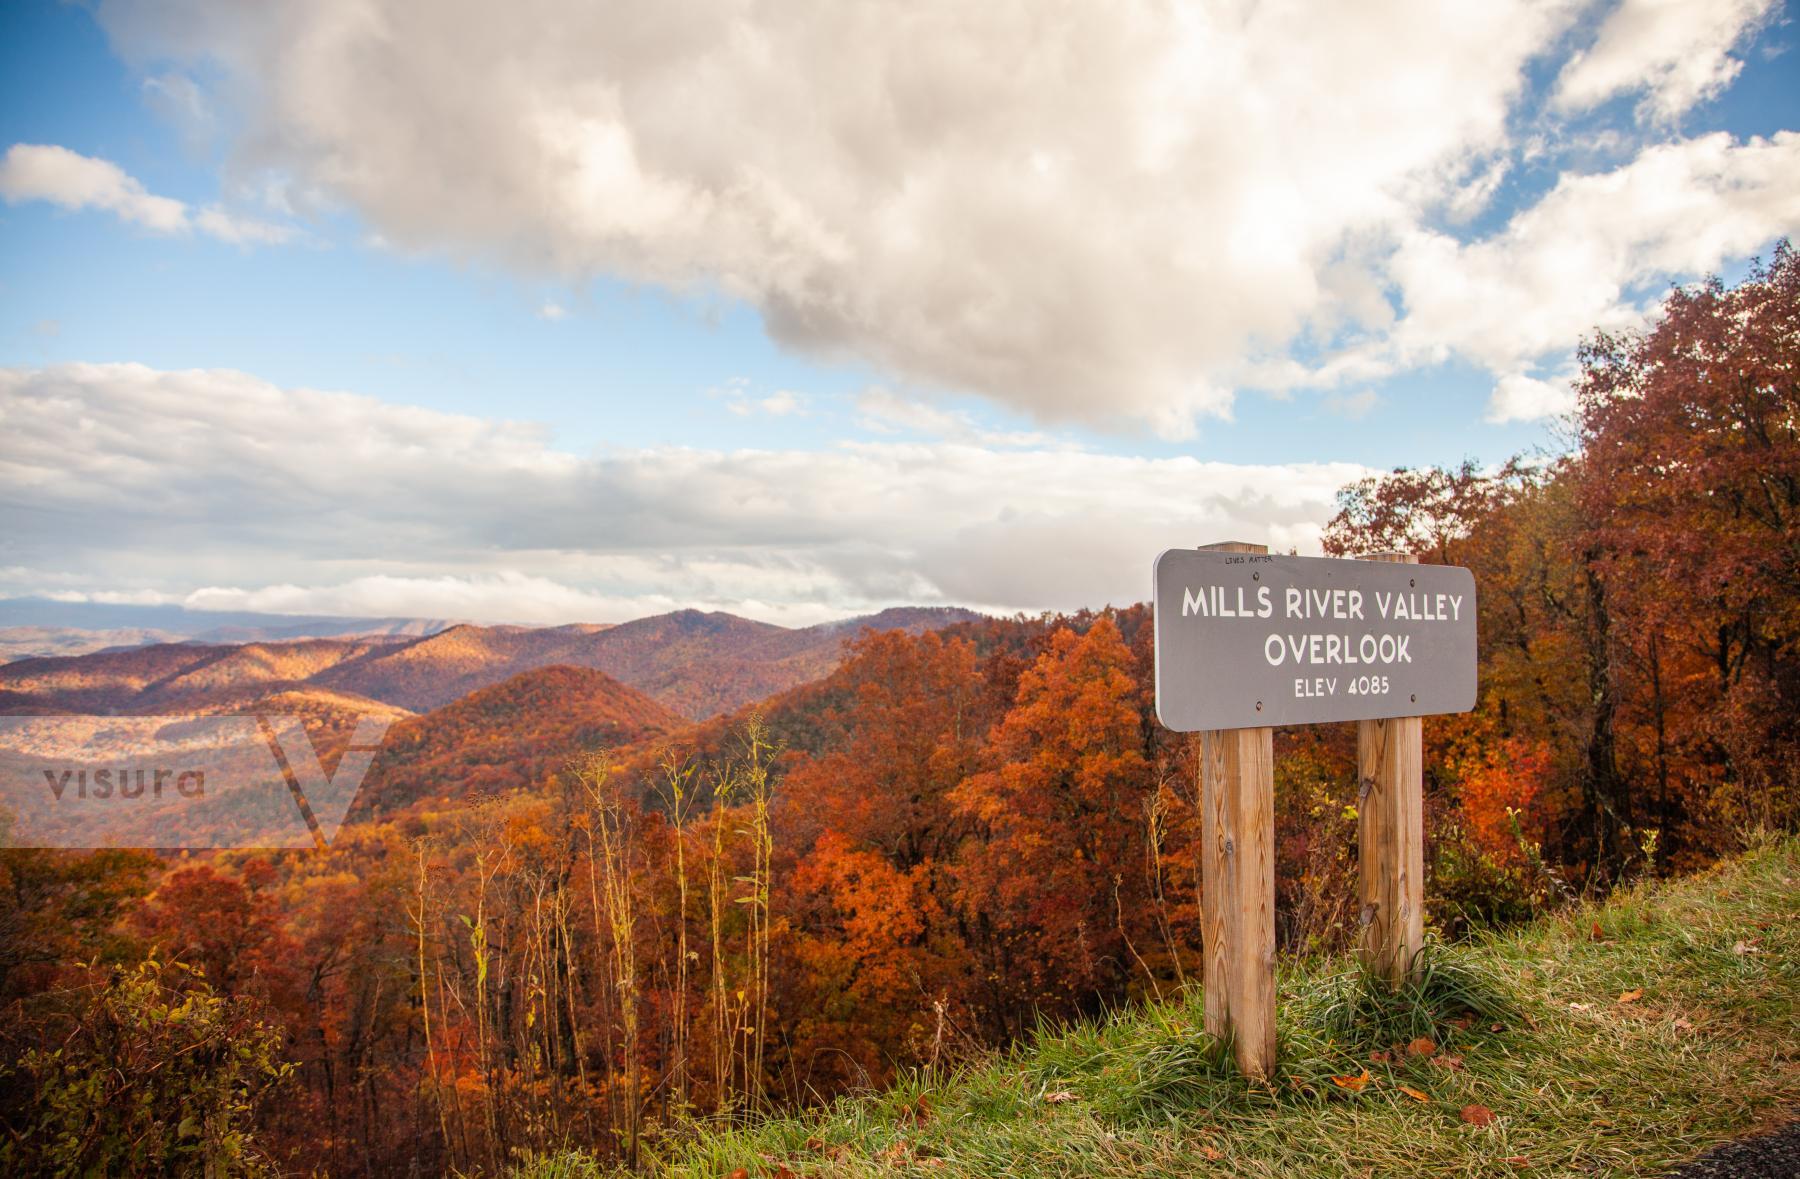 Purchase Traveling the Blue Ridge Parkway in North Carolina in Fall by Katie Linsky Shaw